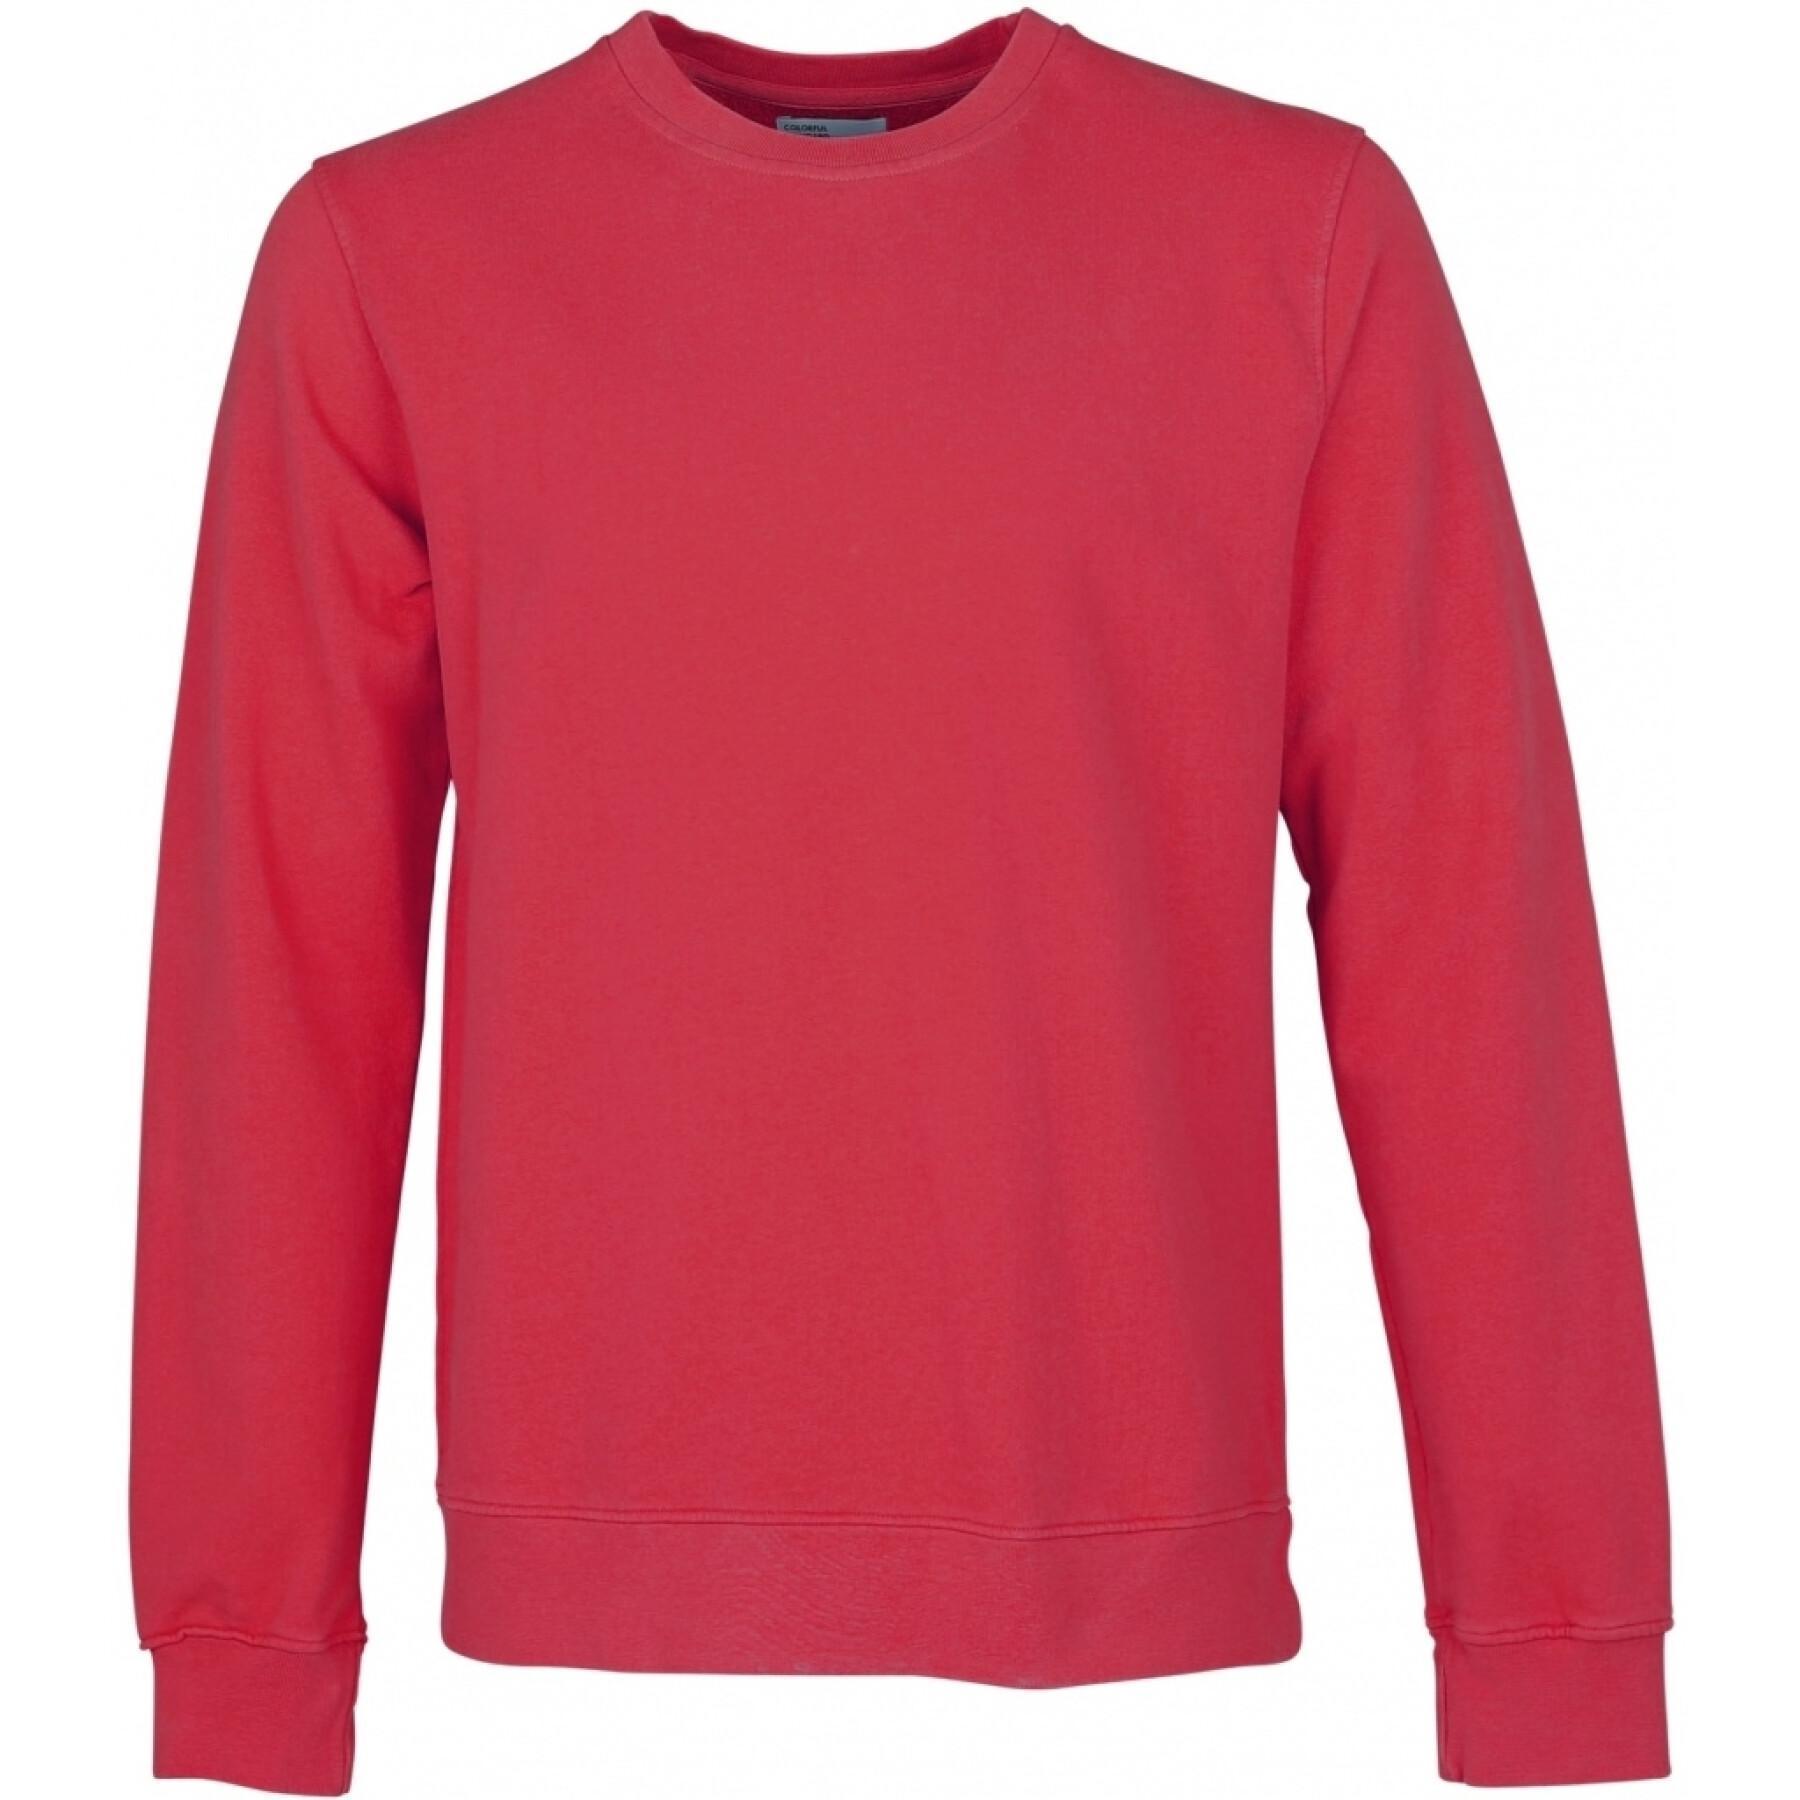 Sweatshirt round neck Colorful Standard Classic Organic scarlet red